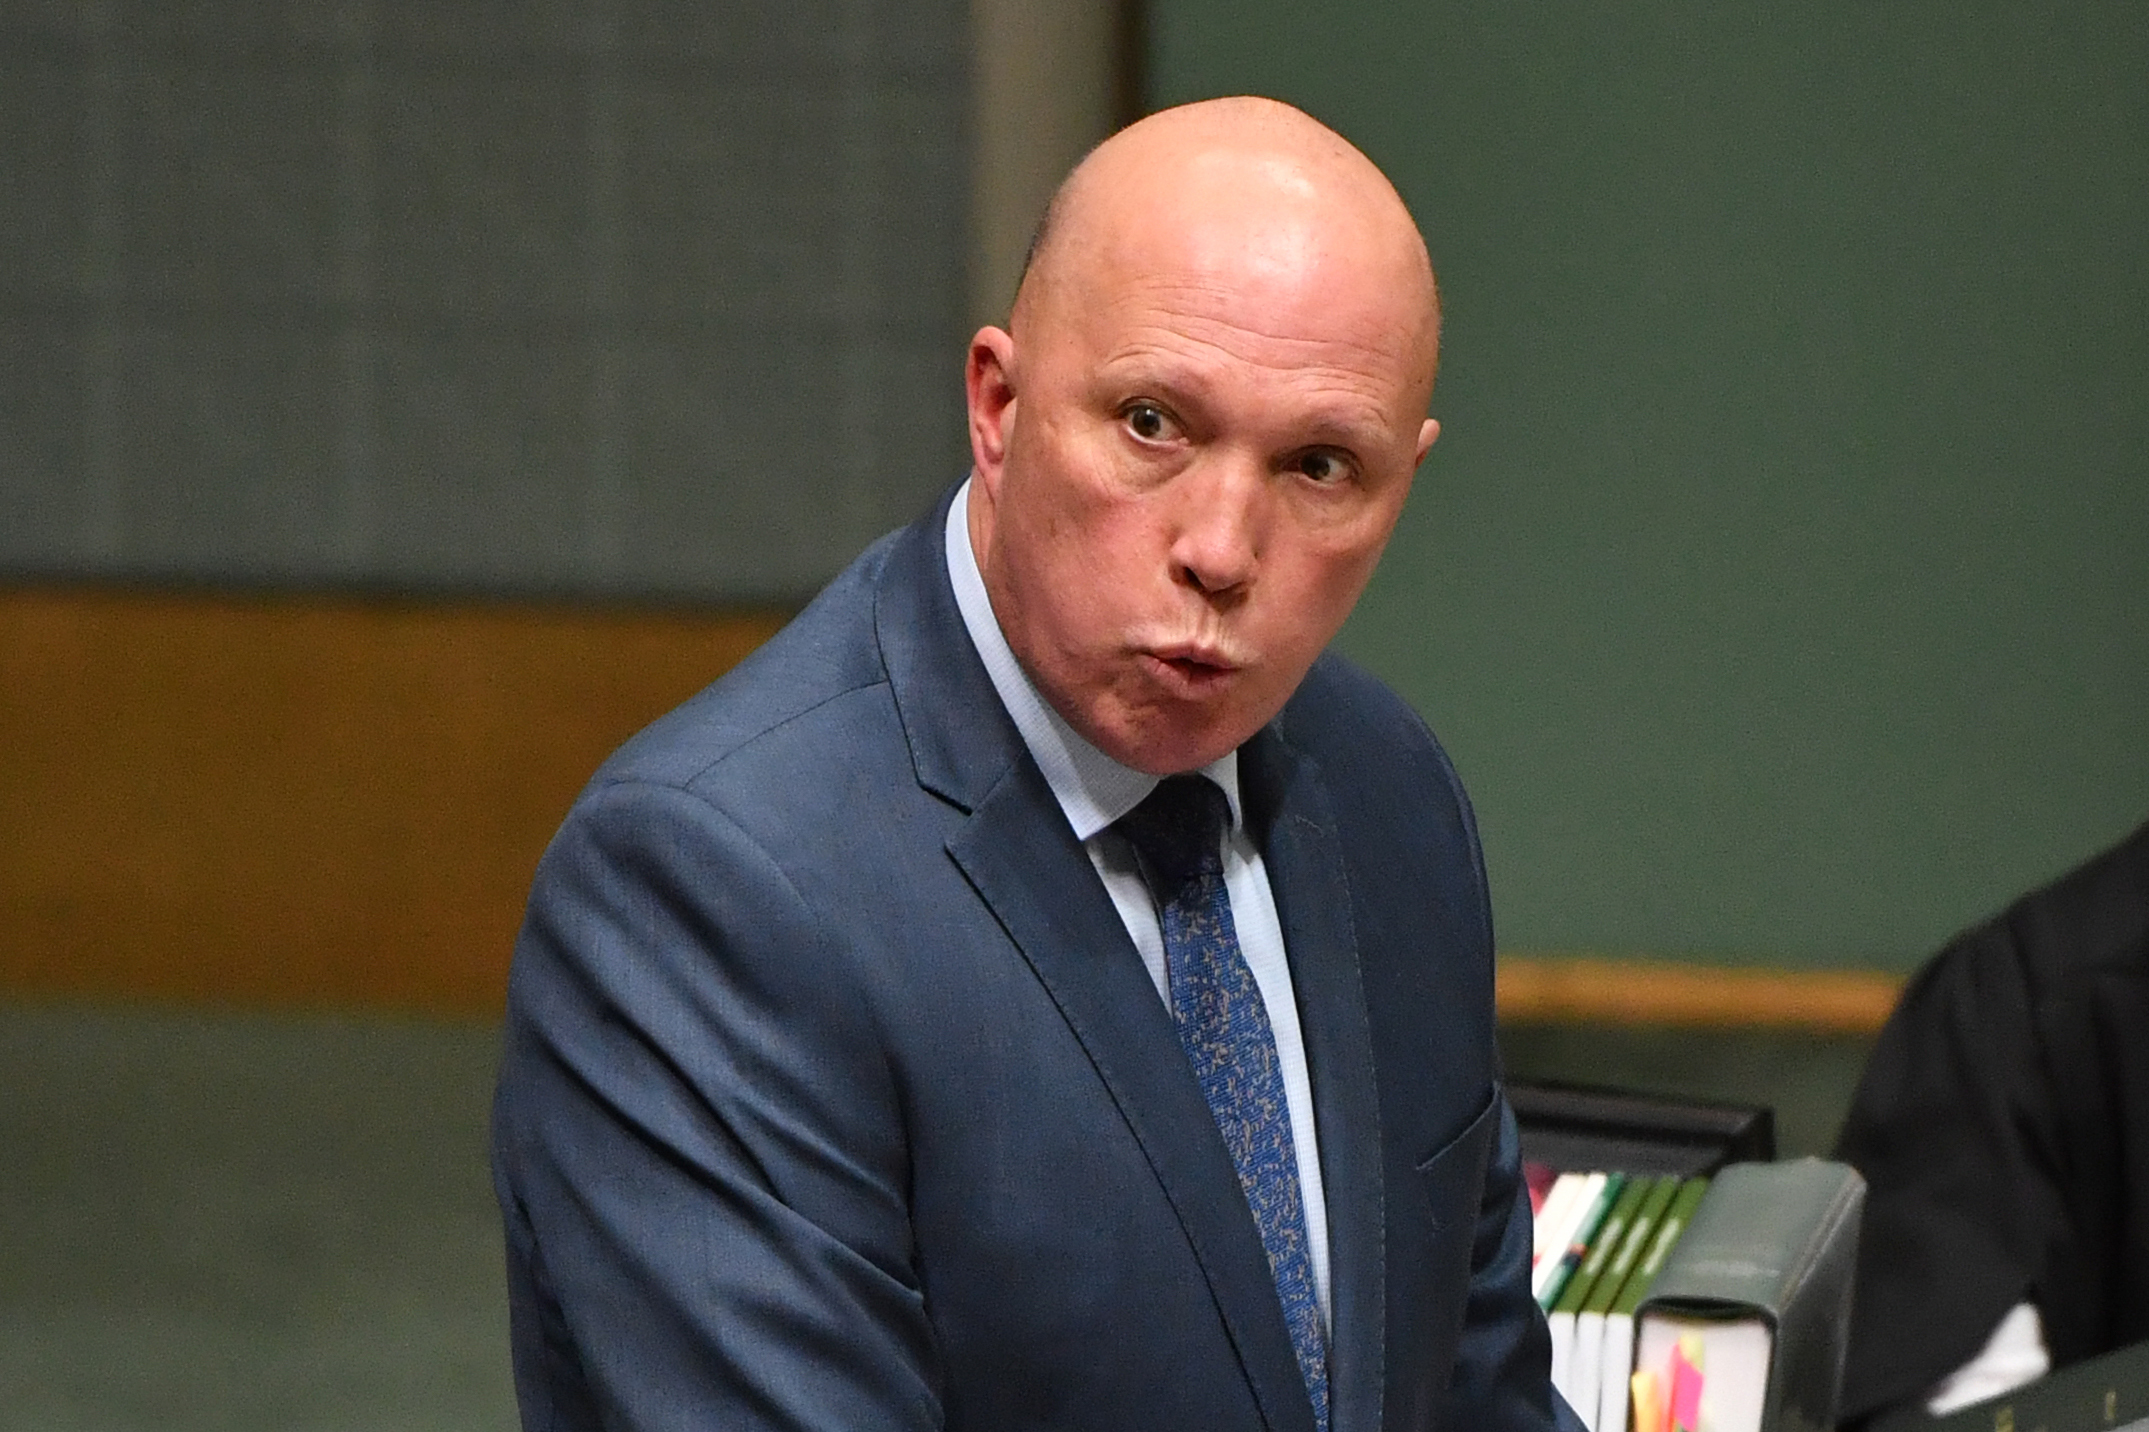 Peter Dutton Threatened With Contempt As Judge Slams Him For Failing To Comply With The Law